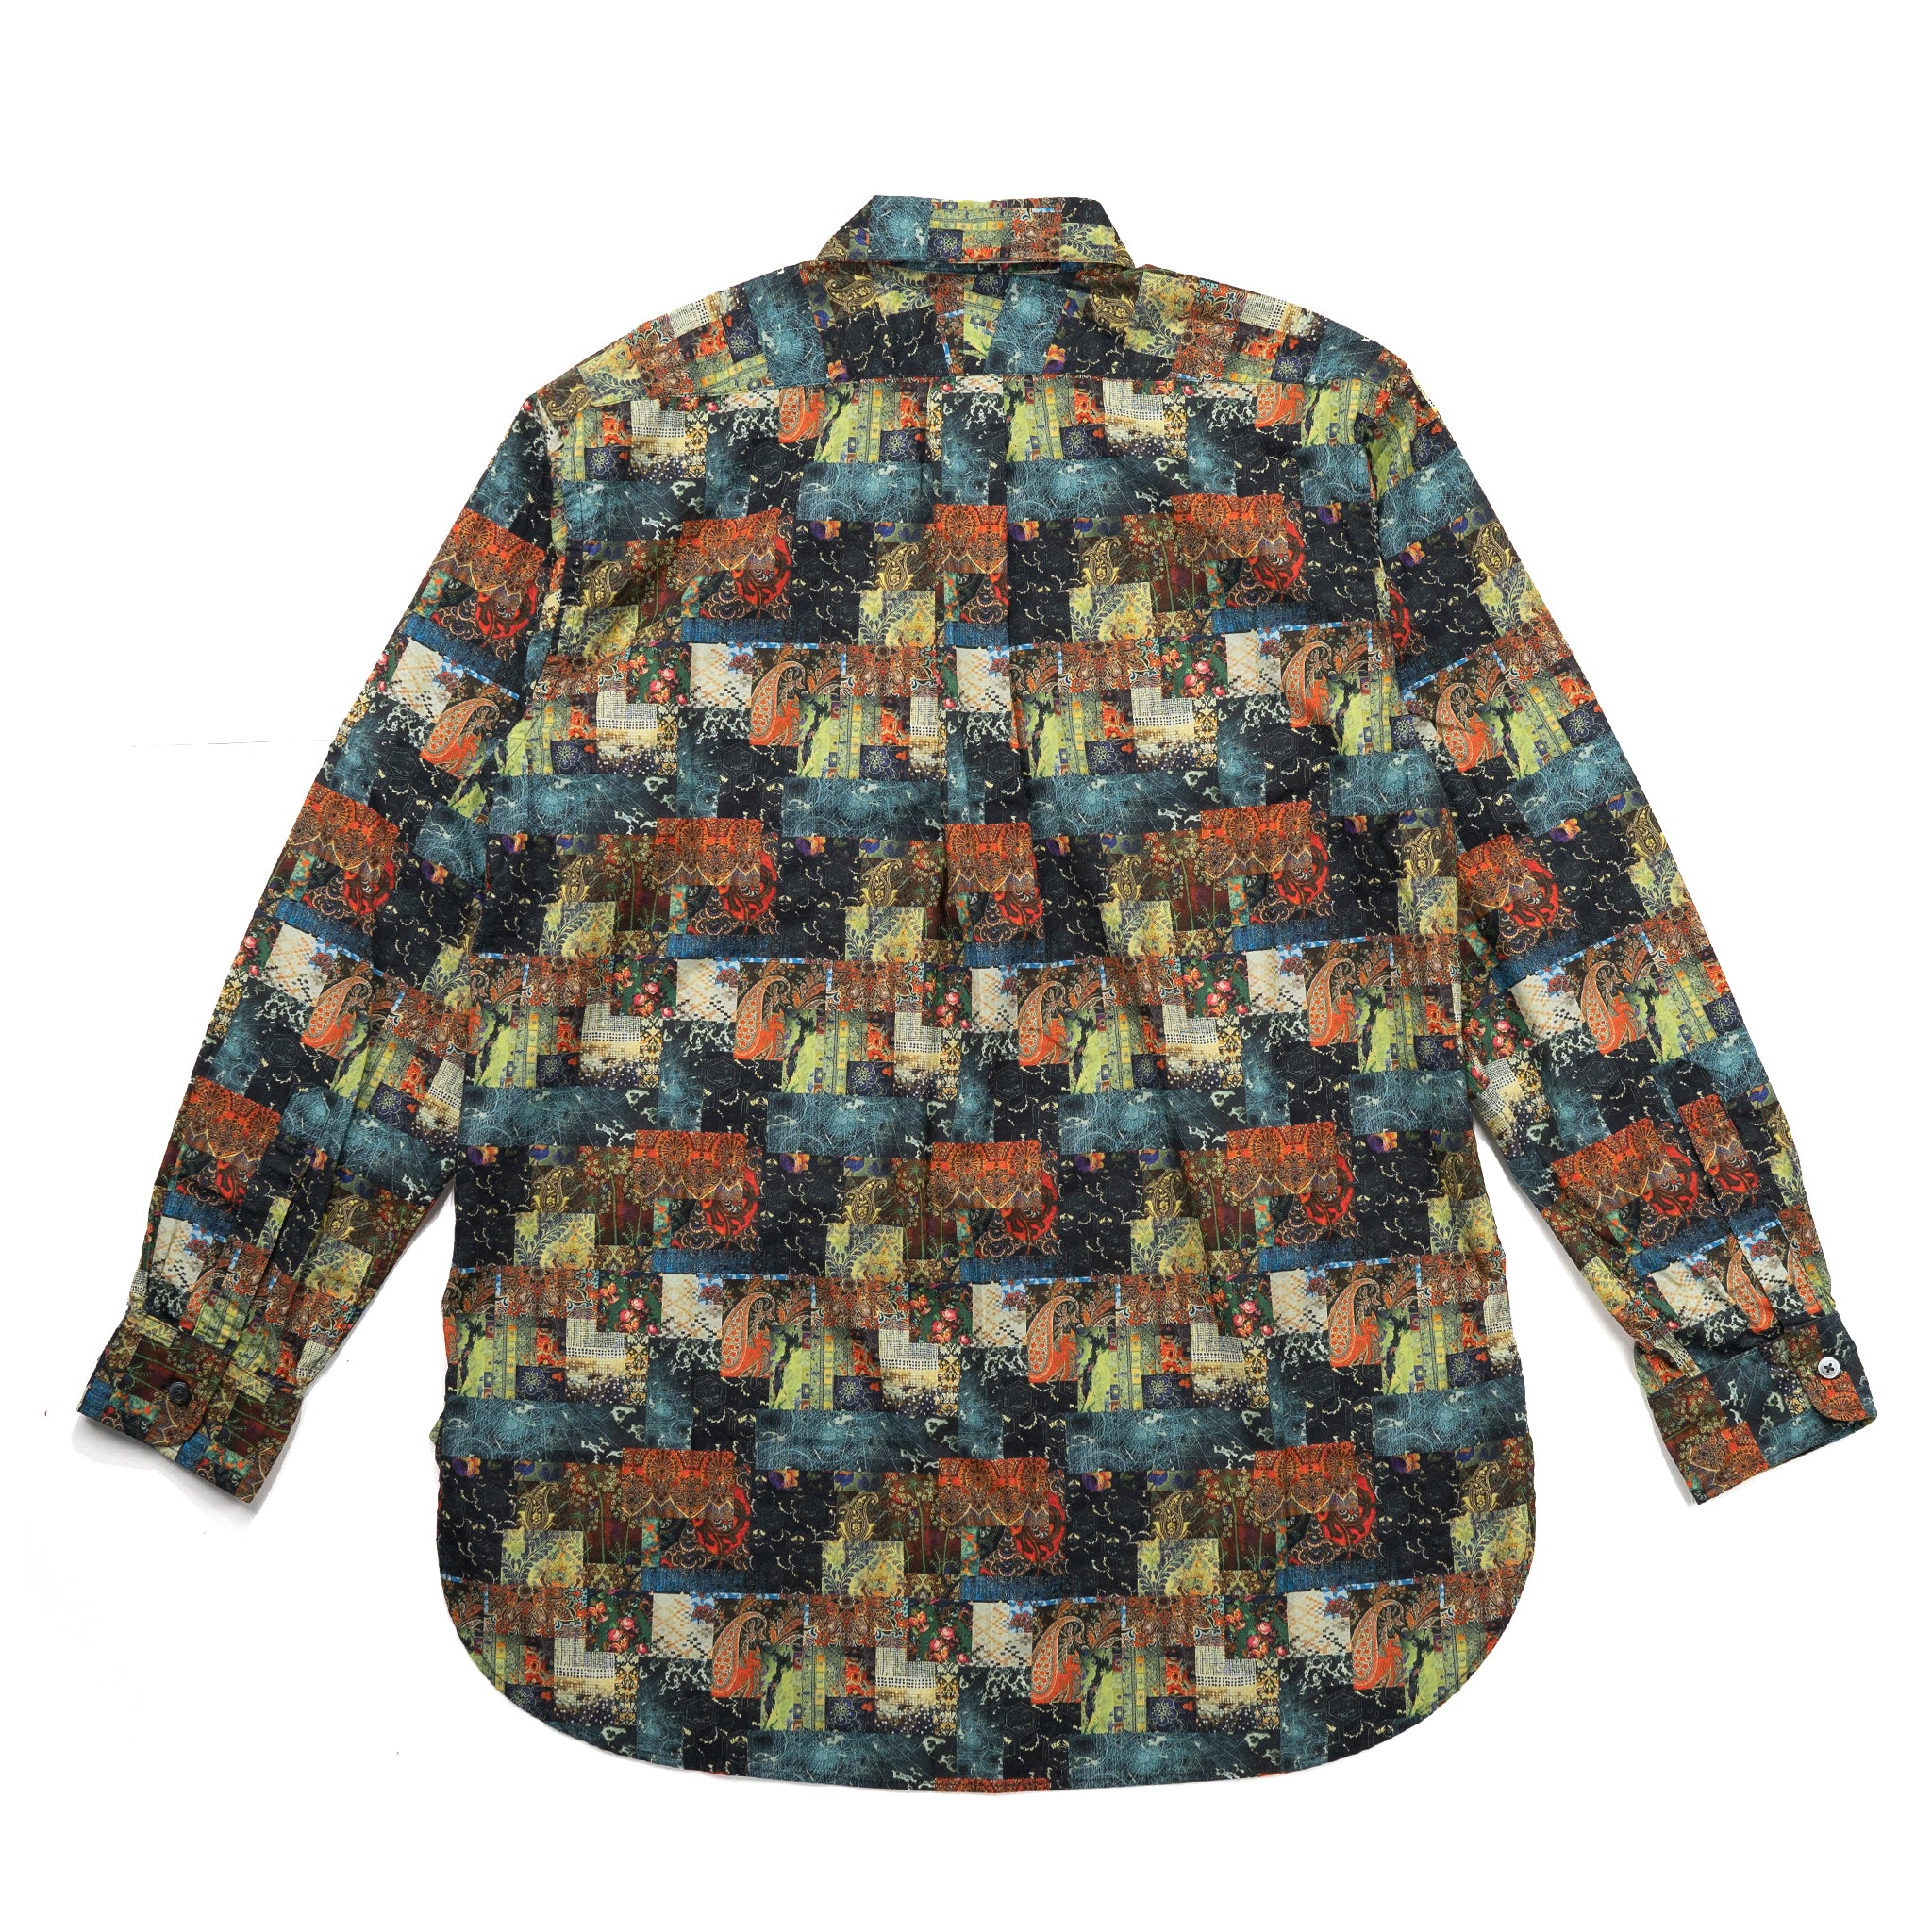 19 Century BD Recycled Shirt 22F1A001 Multi Color Patchwork